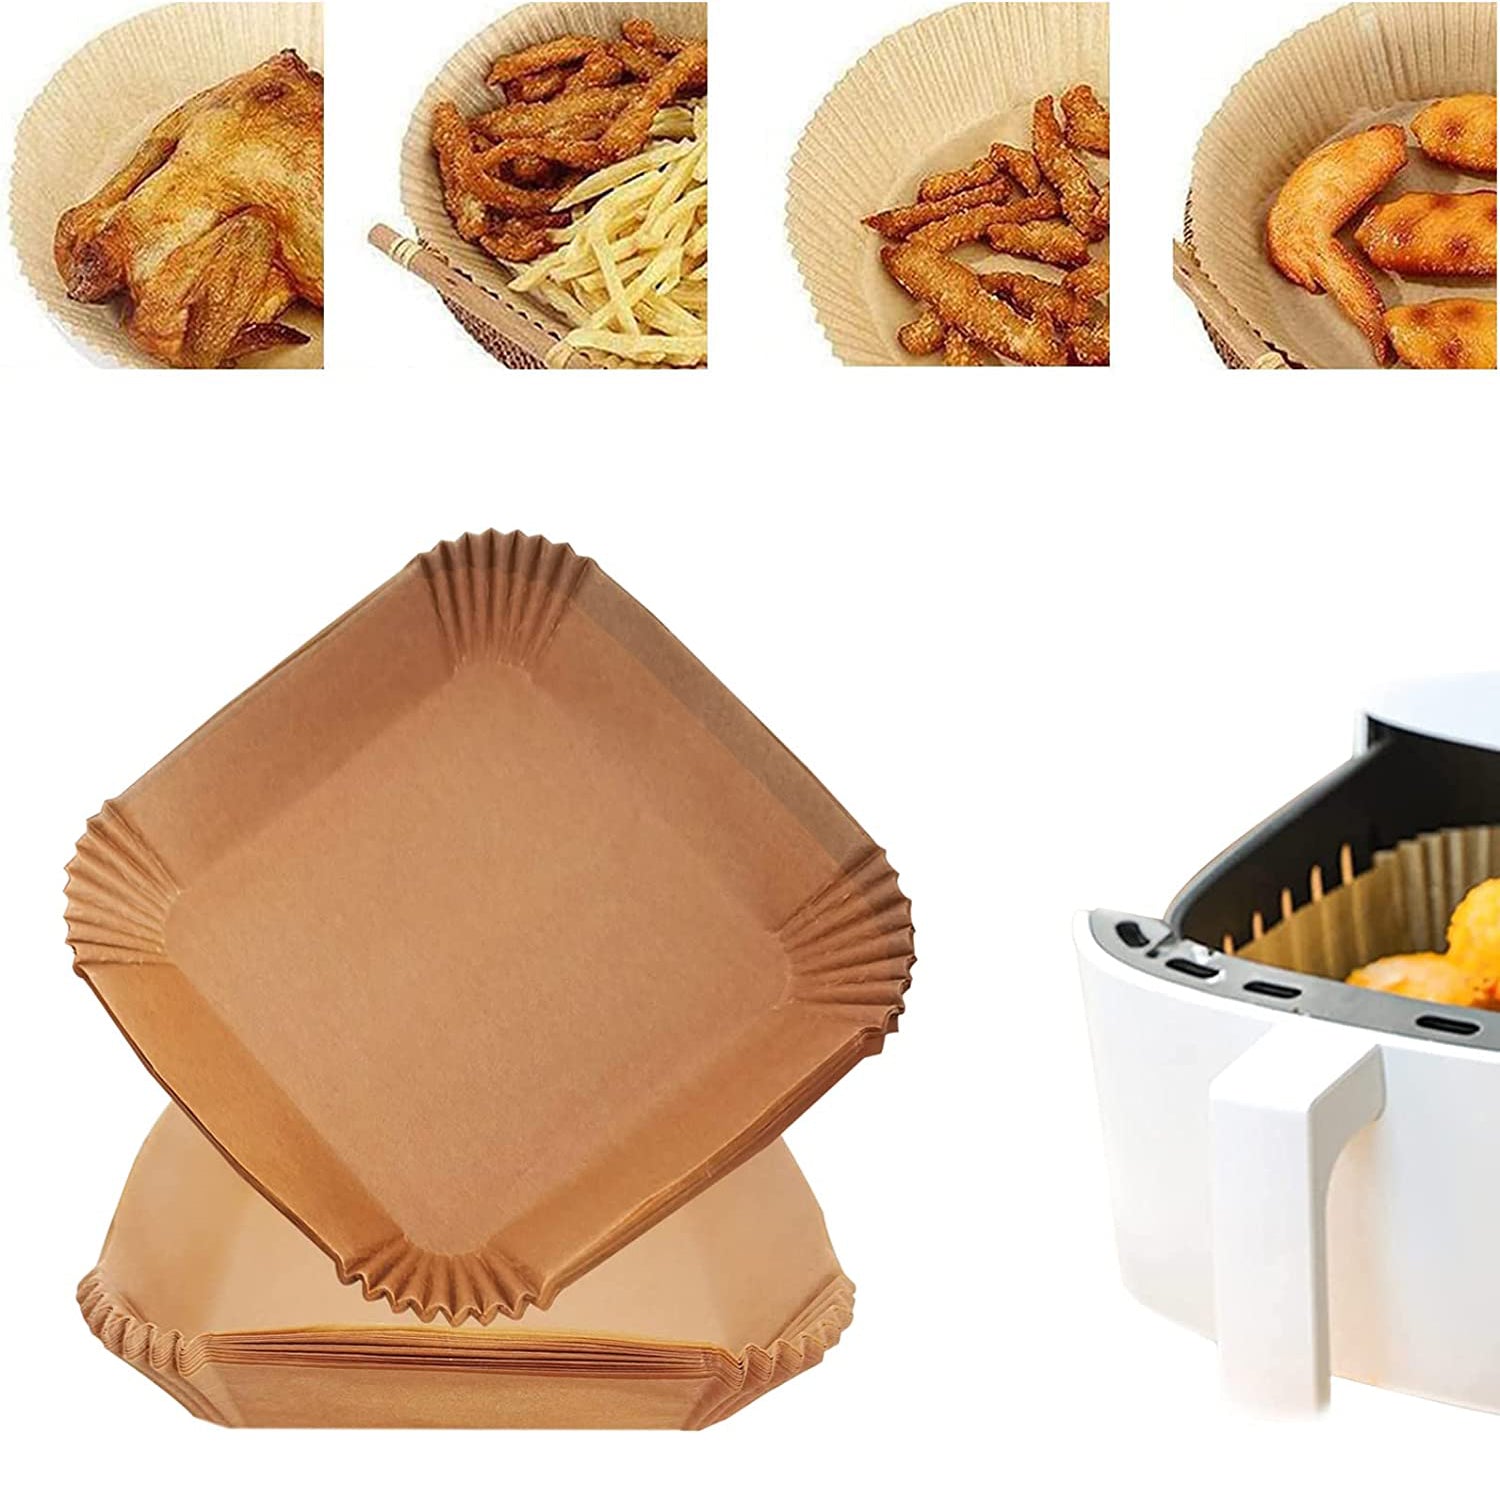 50 Pieces Air Fryer Disposable Paper Liners Kitchen Tools Gadgets Dailysale 708138 ?v=1656016929